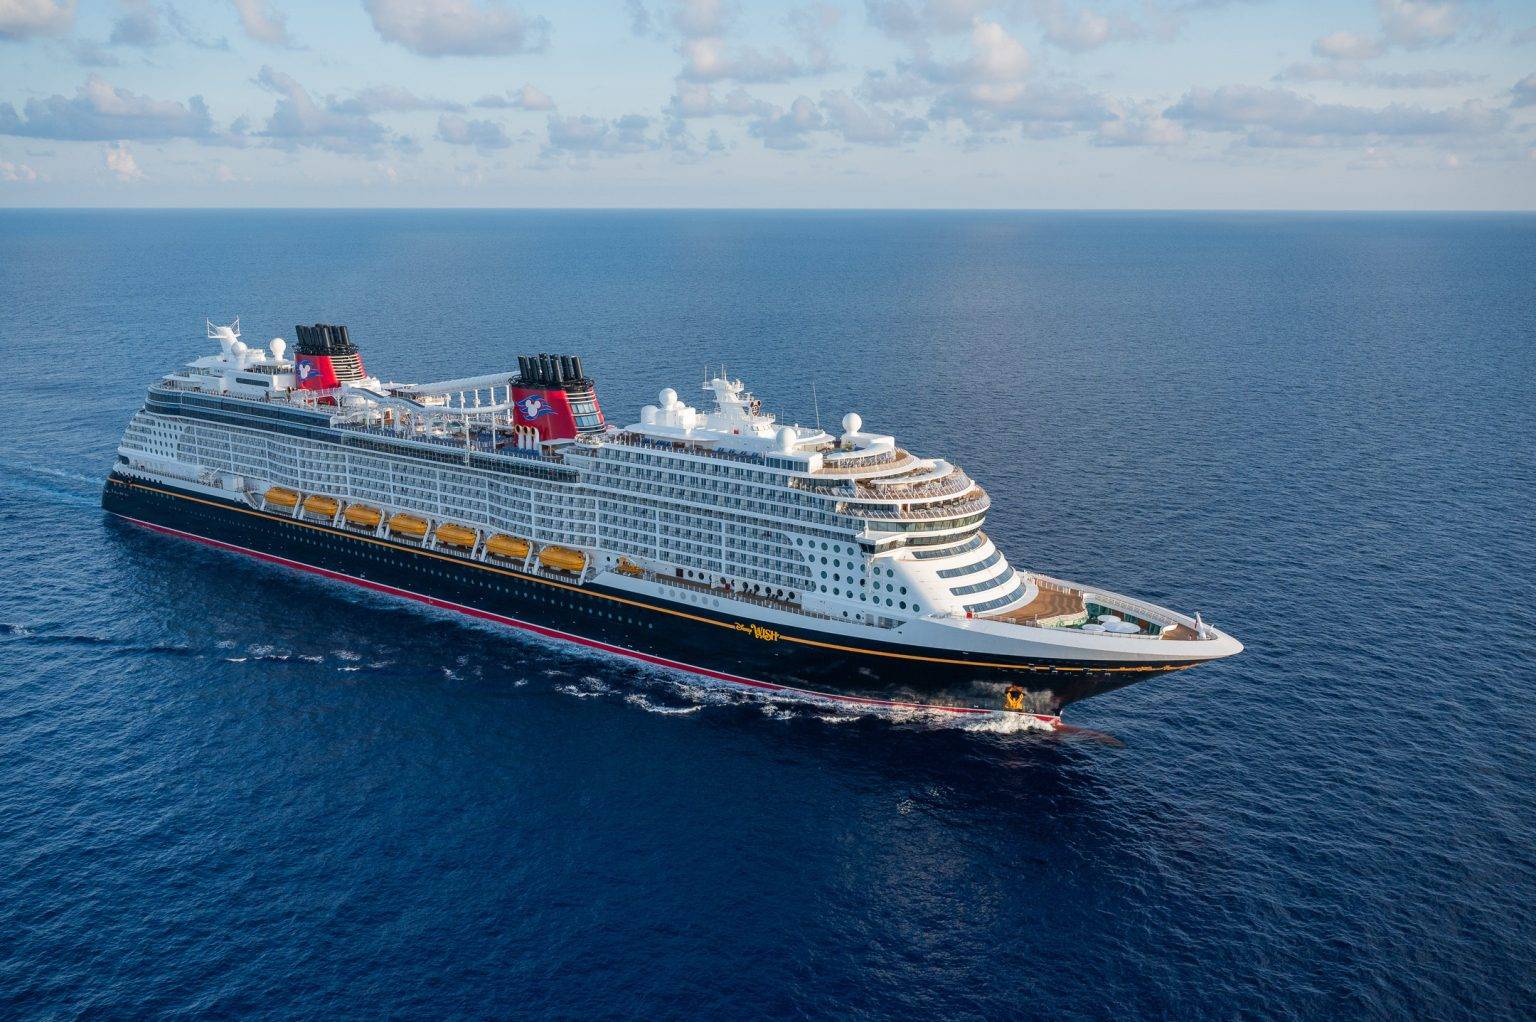 Disney Cruise Line Signs Agreement with Oriental Land Co.